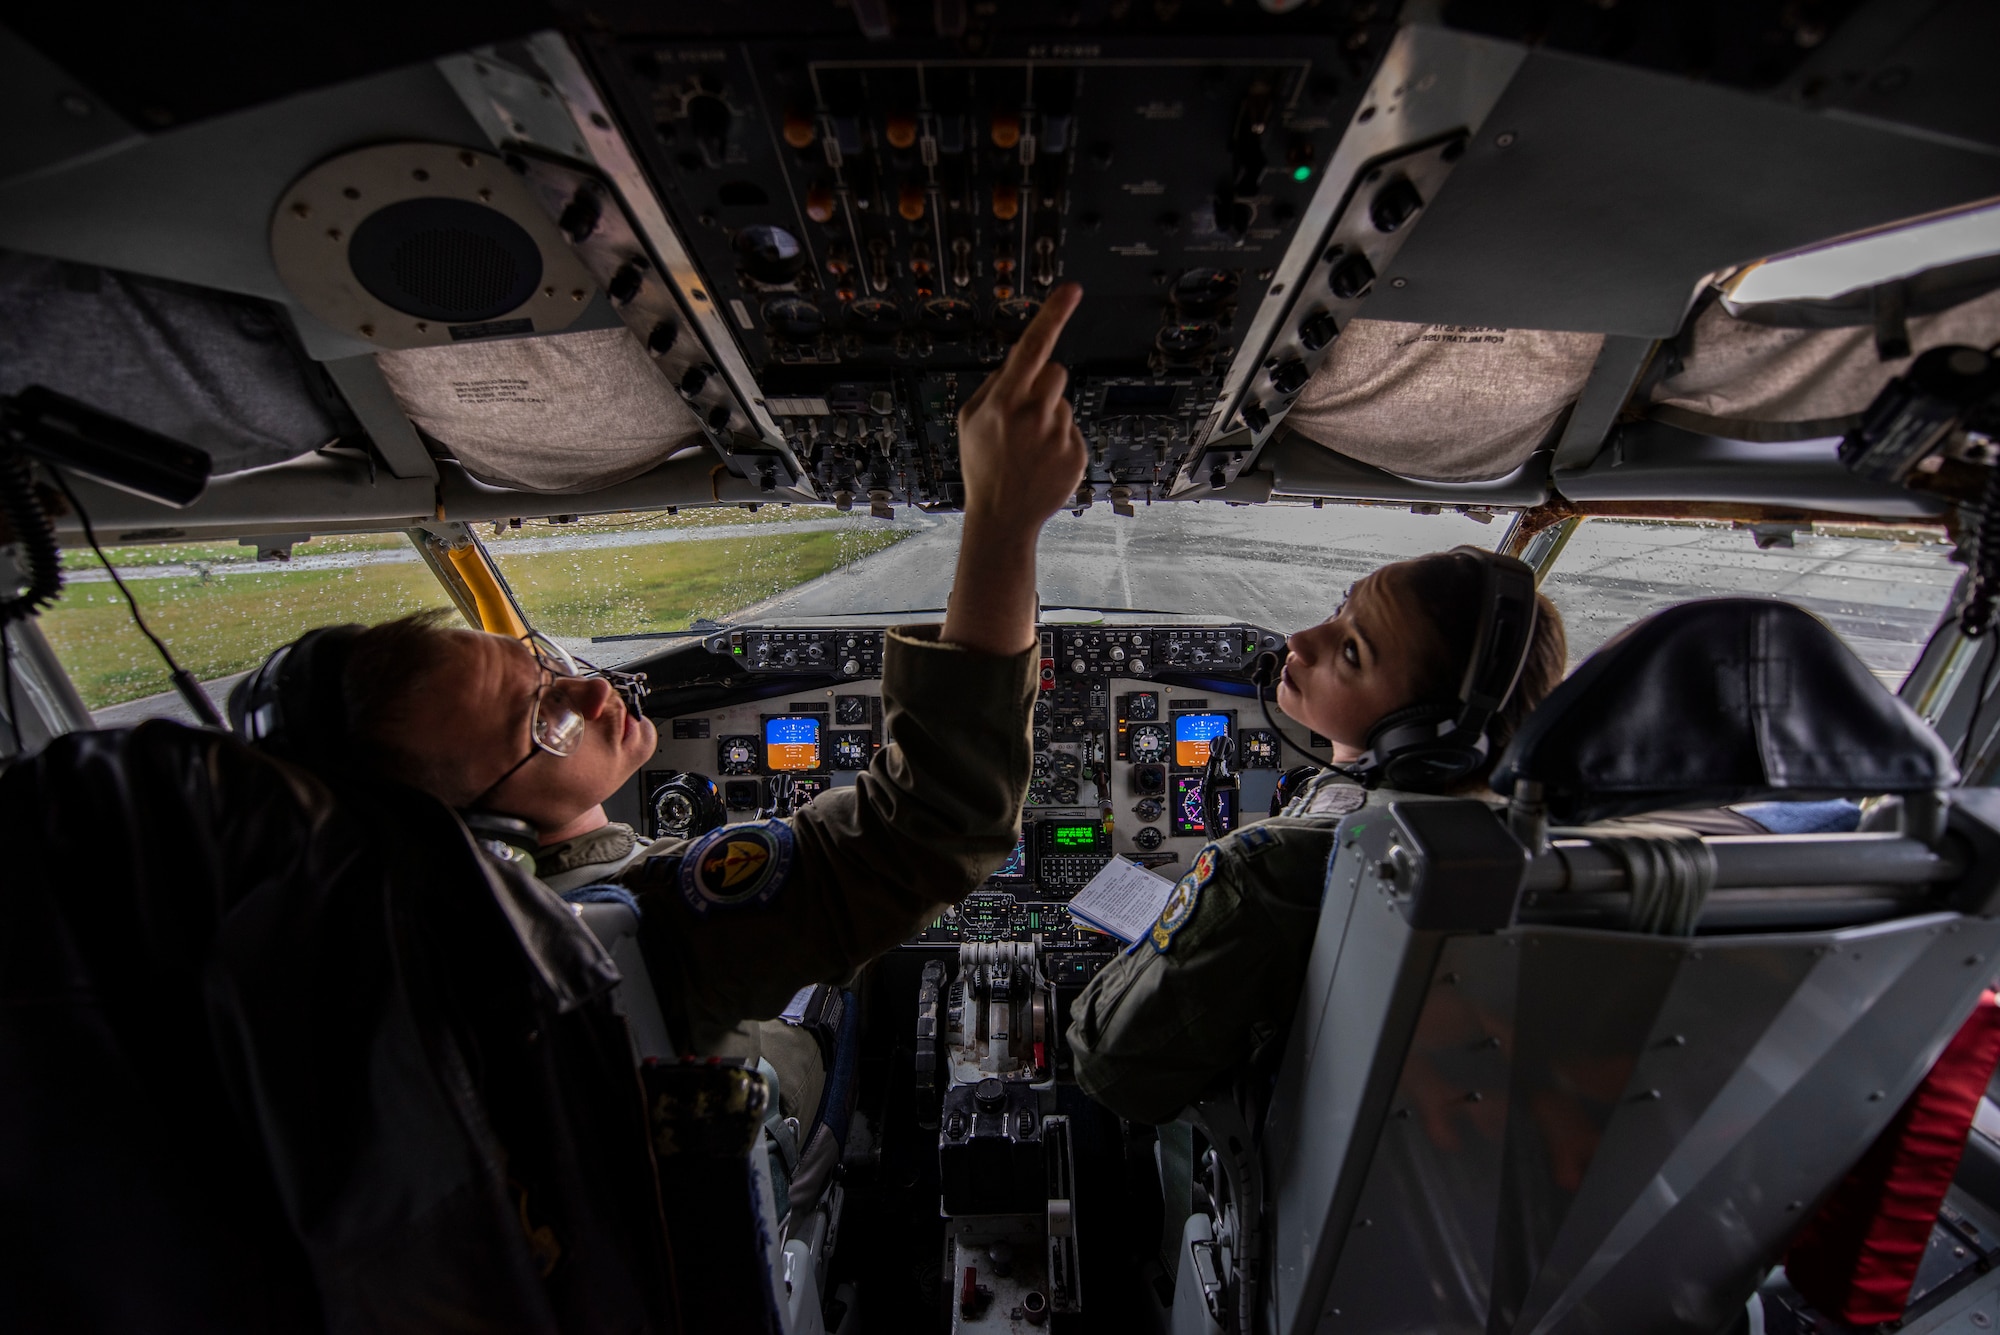 Capt. Grant Starkweather and Capt. Jori Ingersoll, 351st Air Refueling Squadron pilots, conduct pre-flight checks aboard a KC-135 Stratotanker at RAF Mildenhall, England, Nov. 14, 2019. The pilots flew an aerial refueling mission in support of Exercise Point Blank. (U.S. Air Force photo by Airman 1st Class Joseph Barron)